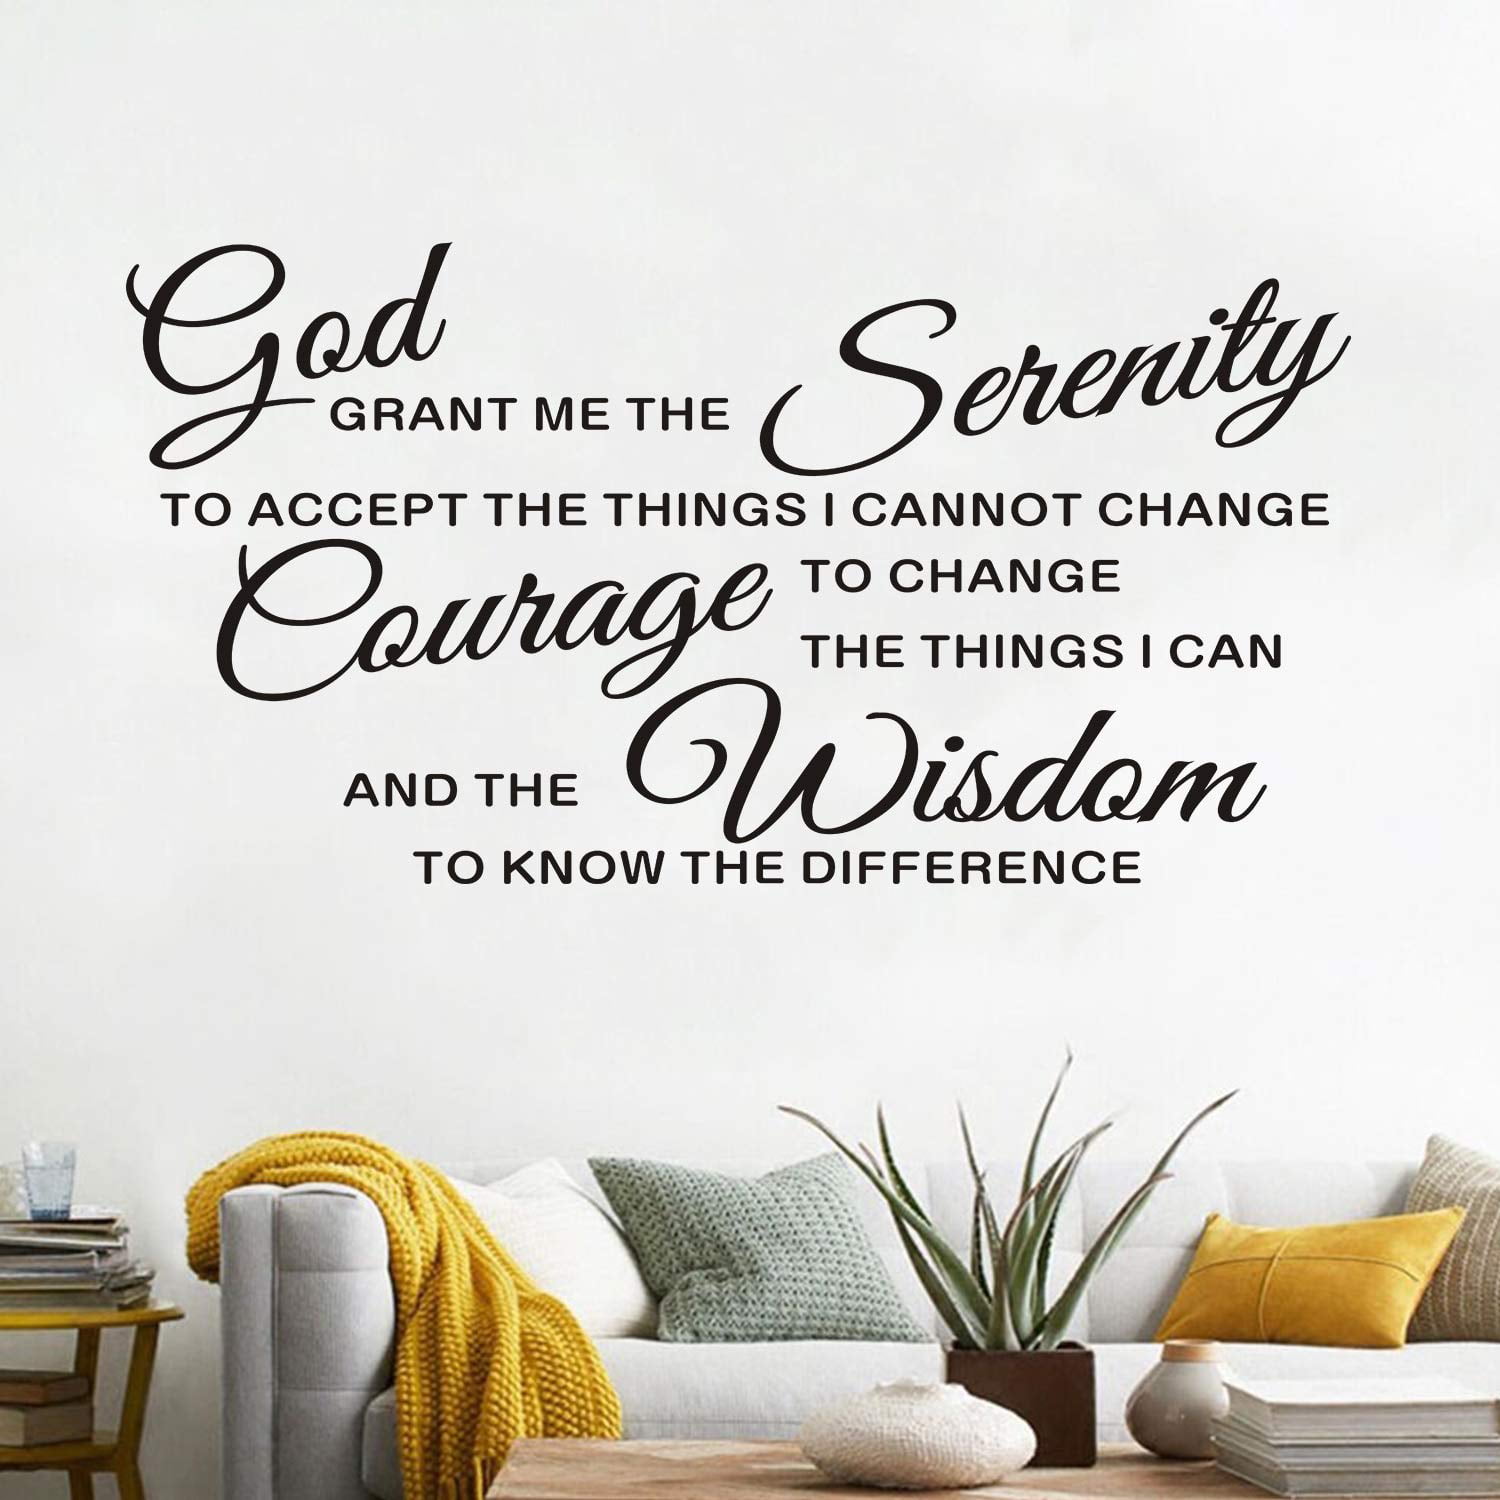 Scripture Bible Wall Decal As For Me My House Lord Quote Vinyl Room Family Decor 